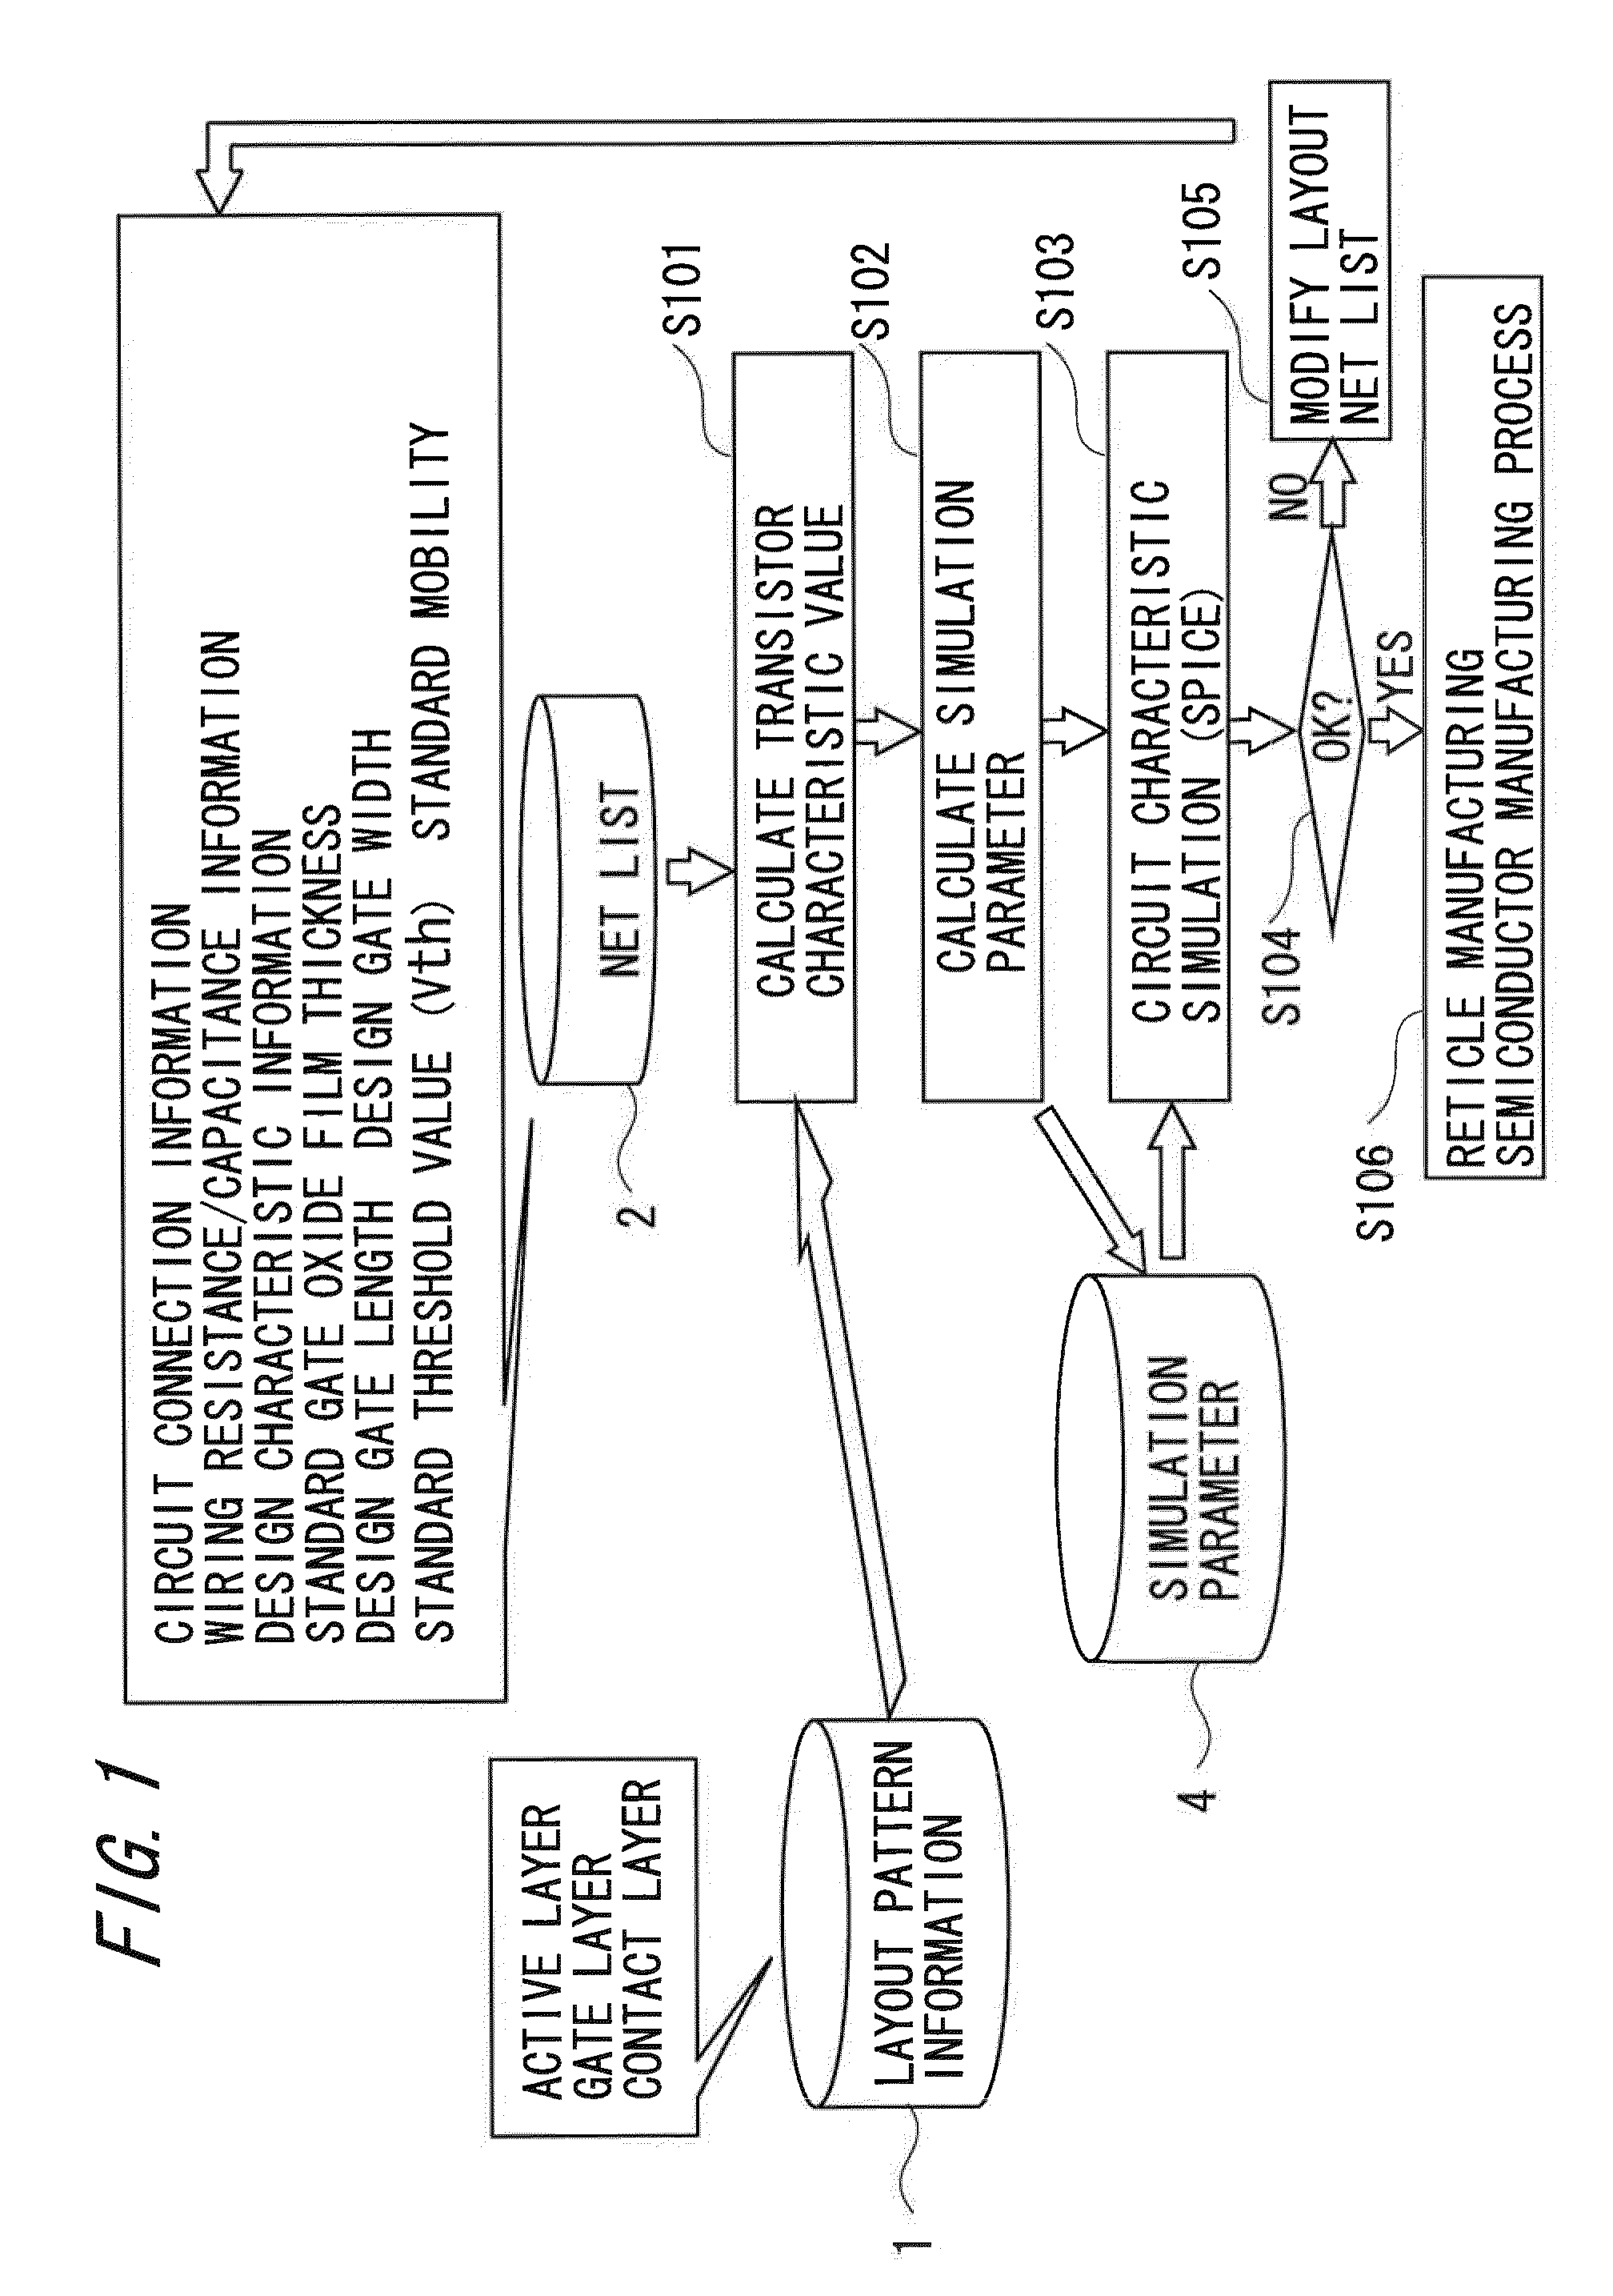 Semiconductor circuit design method and semiconductor circuit manufacturing method